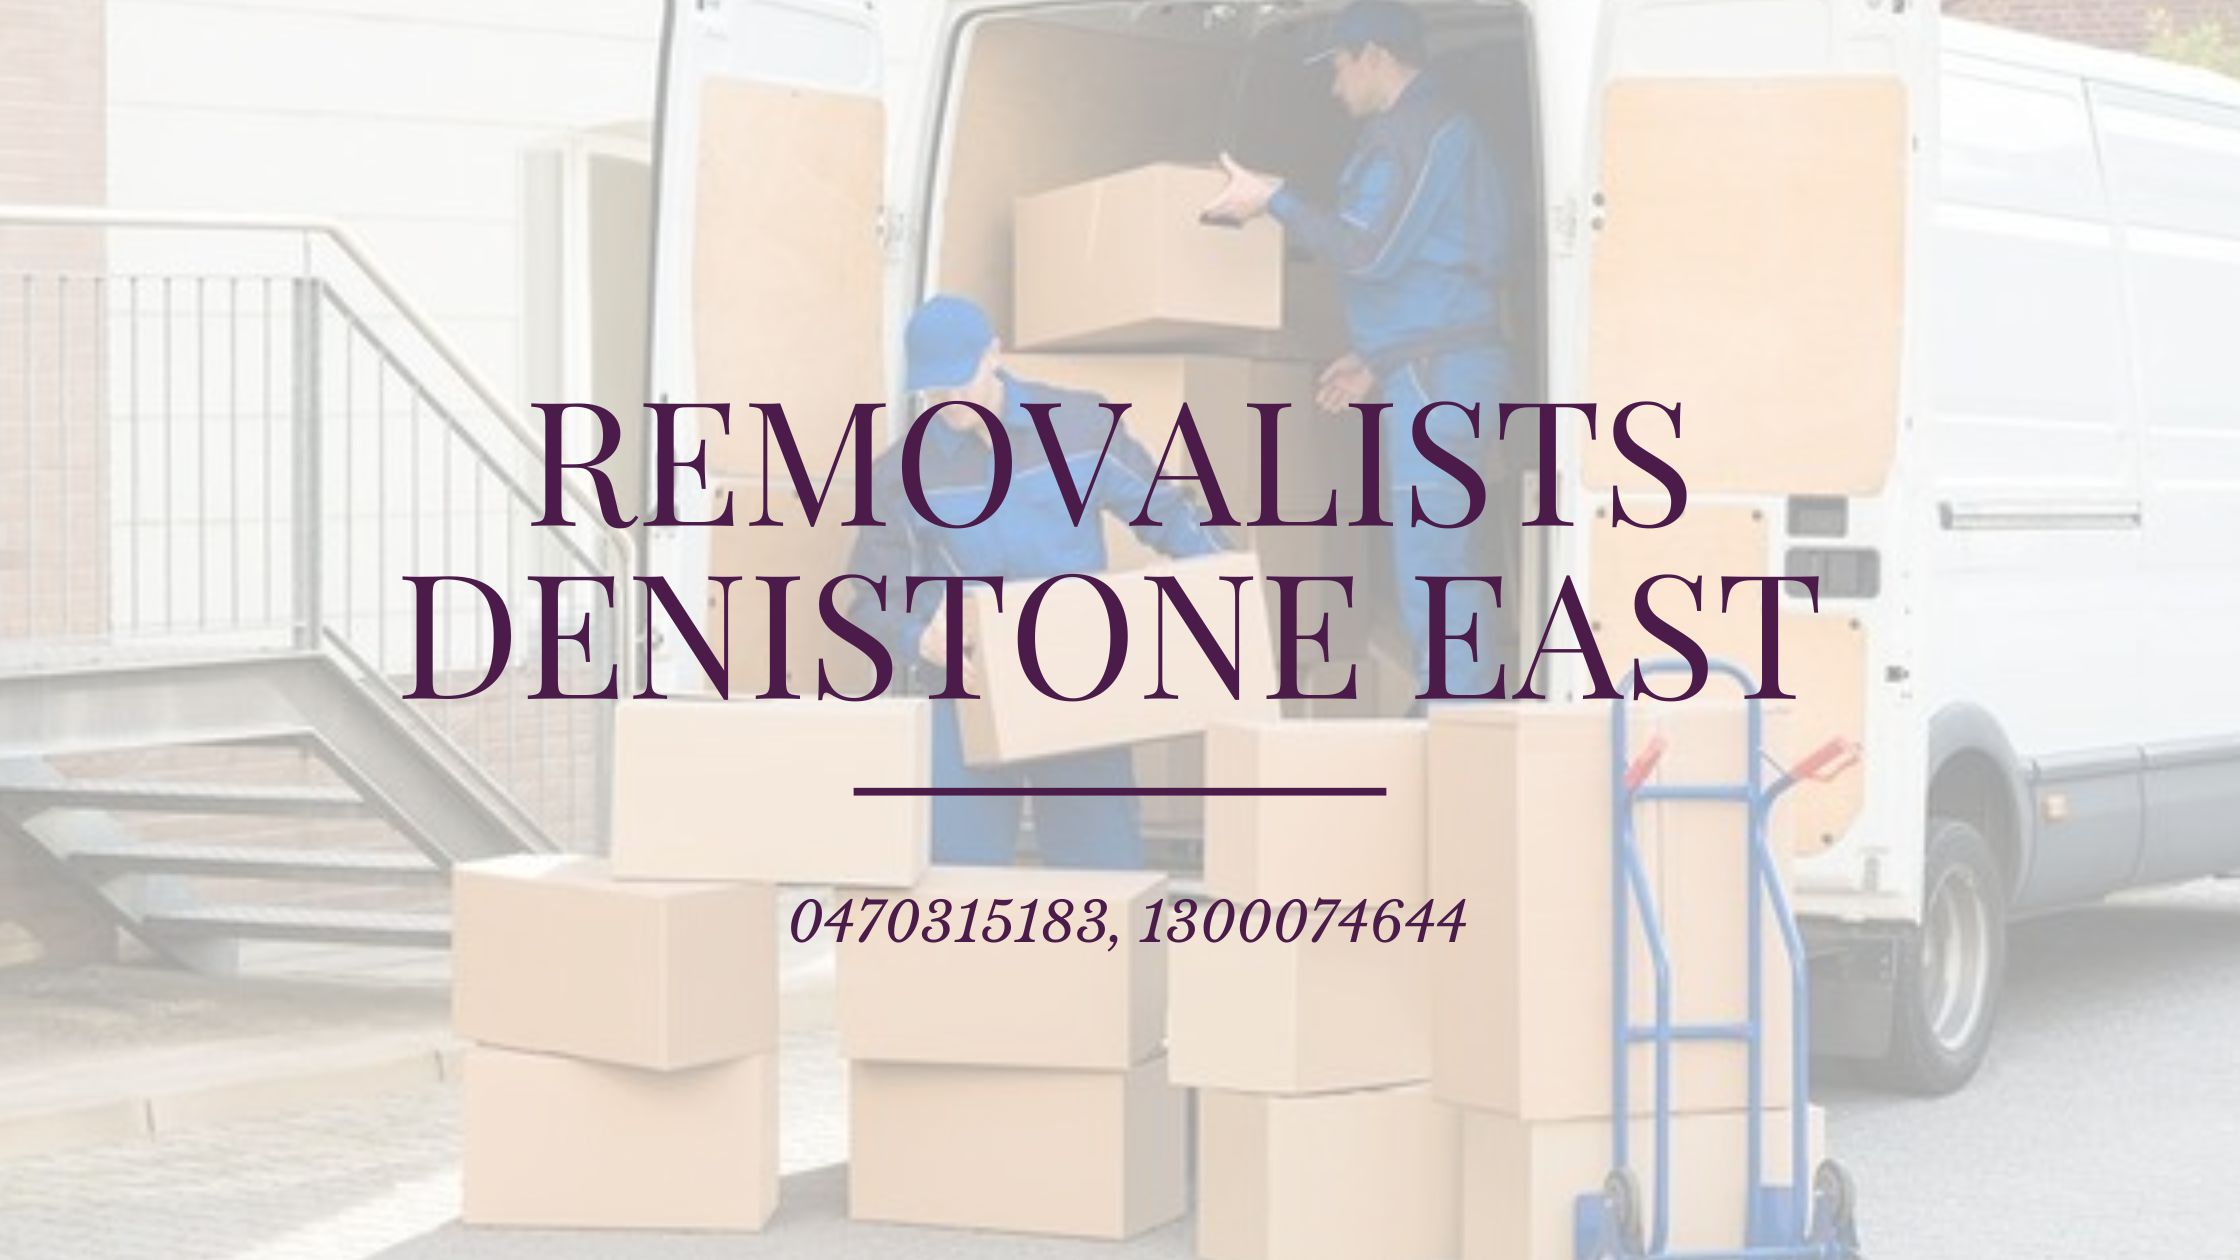 Removalists Denistone East 